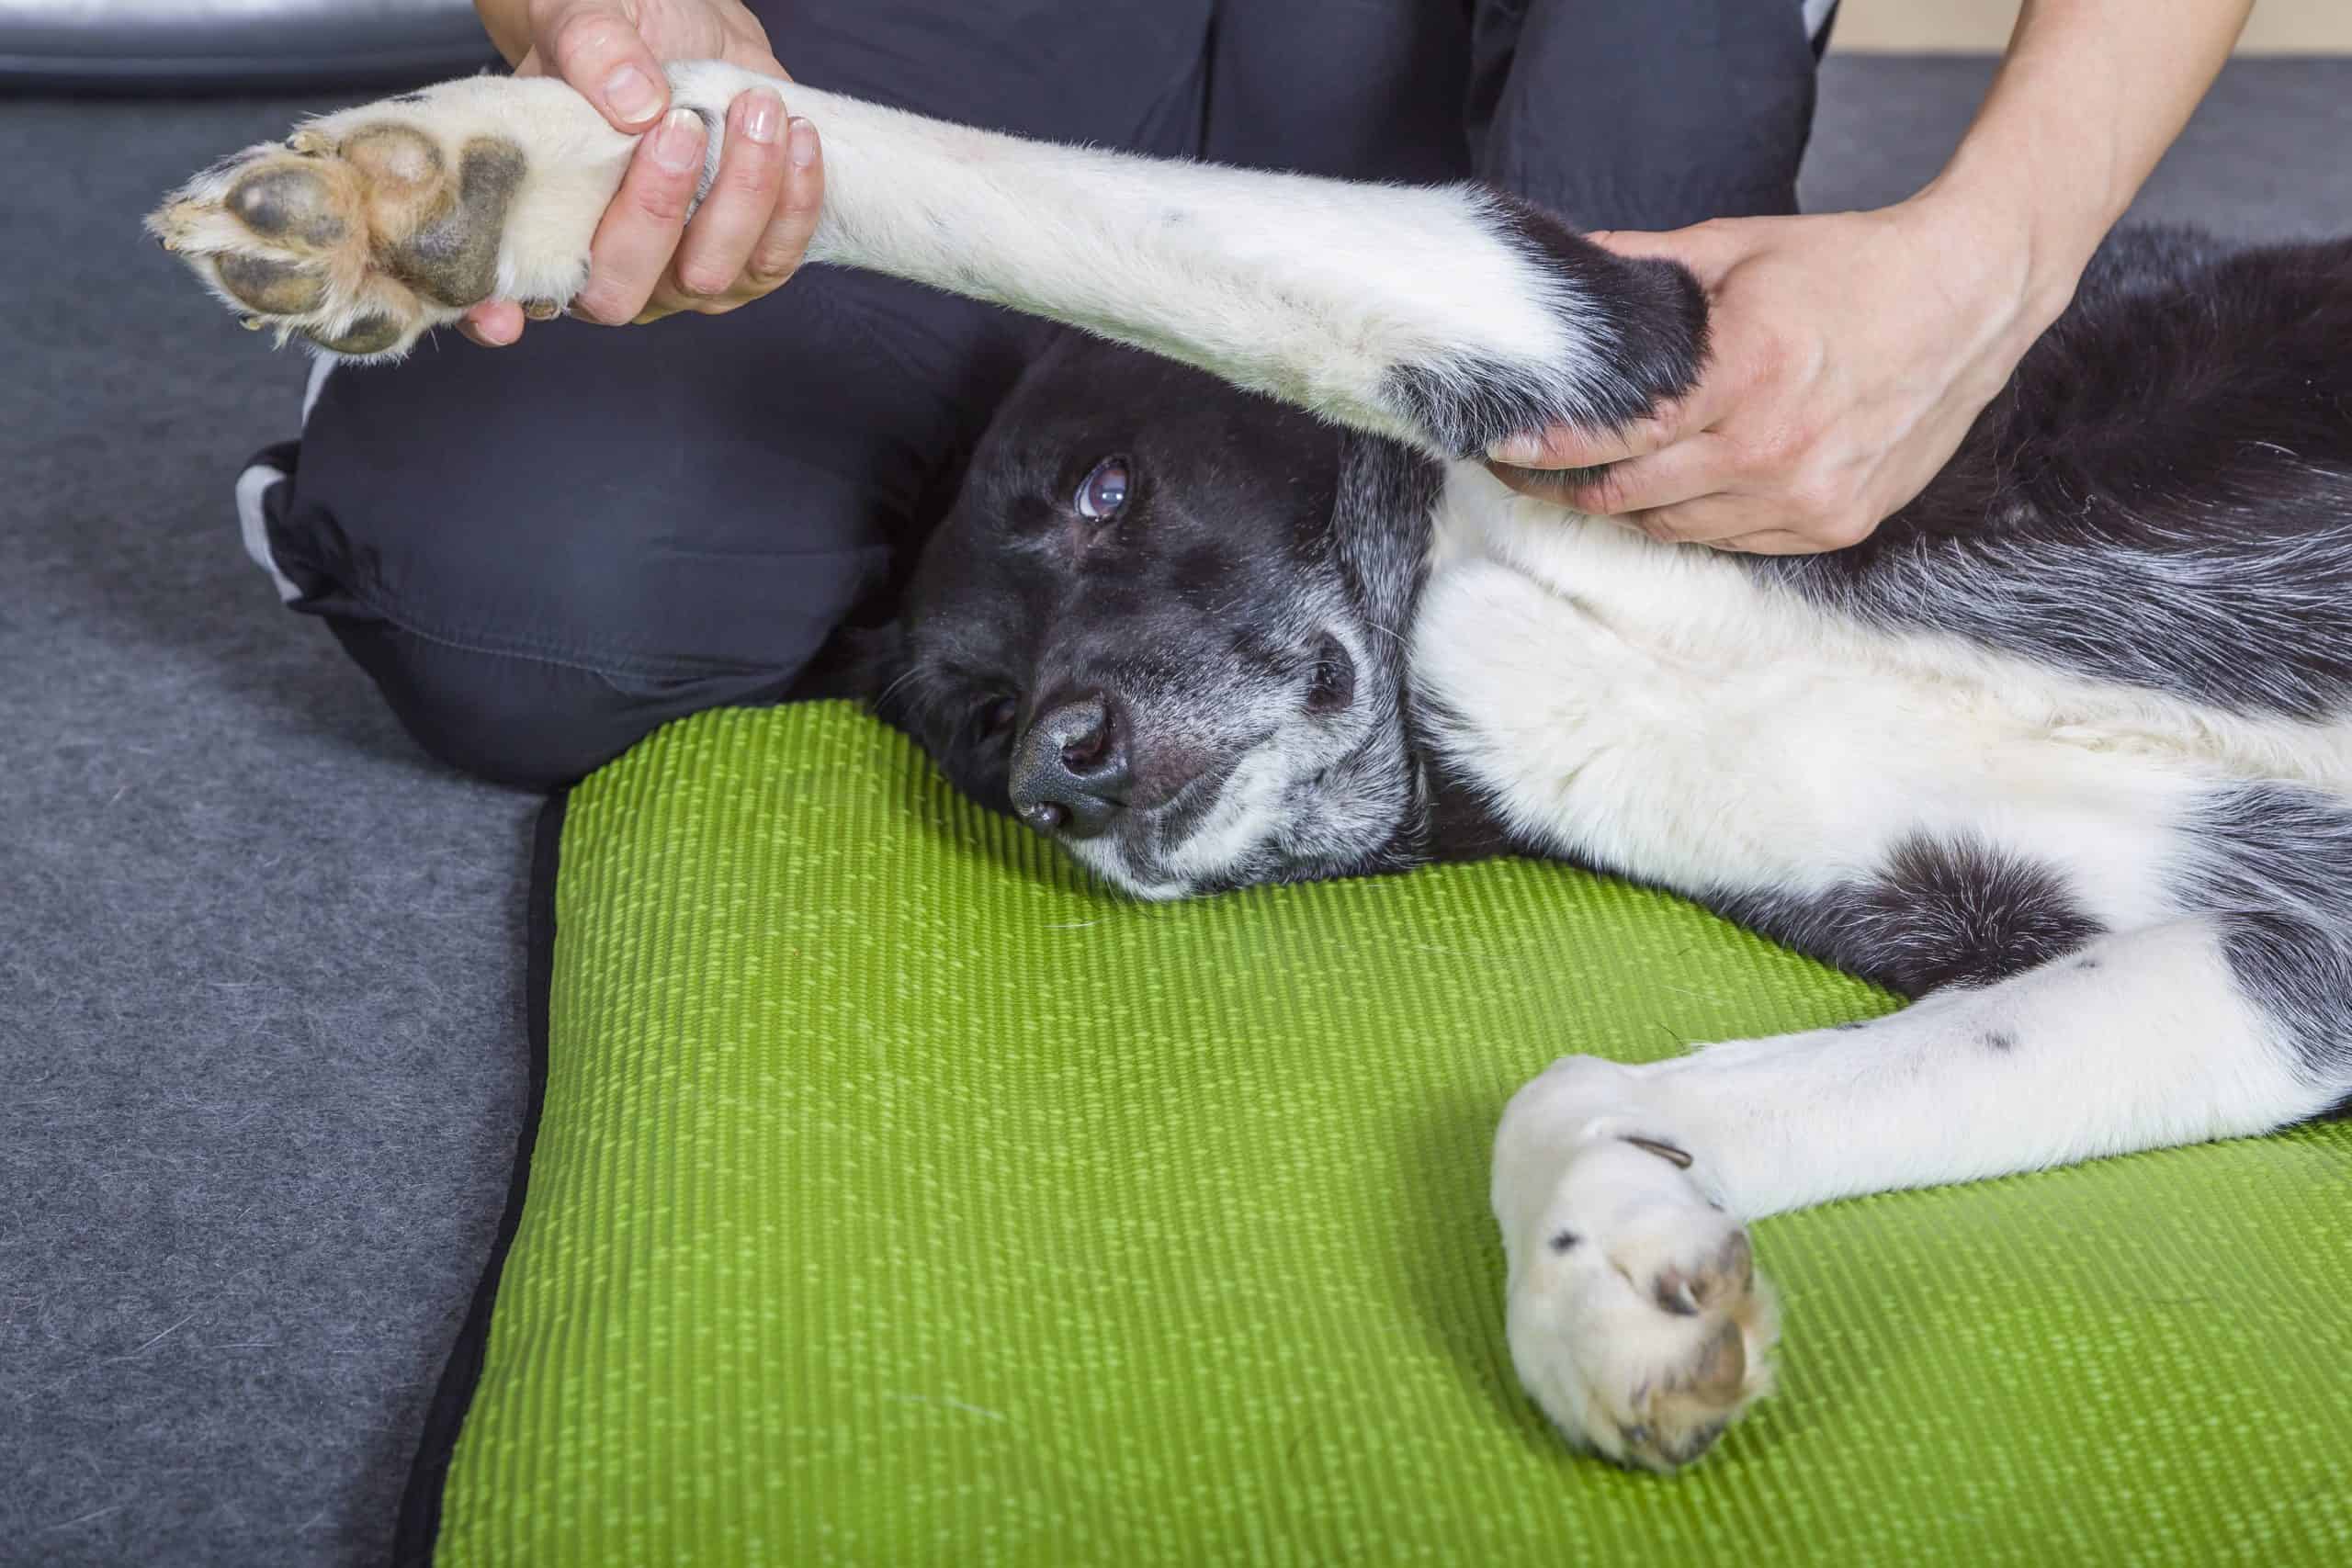 Owner massages border collie. Providing post-surgery care for dogs will help your pup fully rehabilitate and gradually resume regular activities.